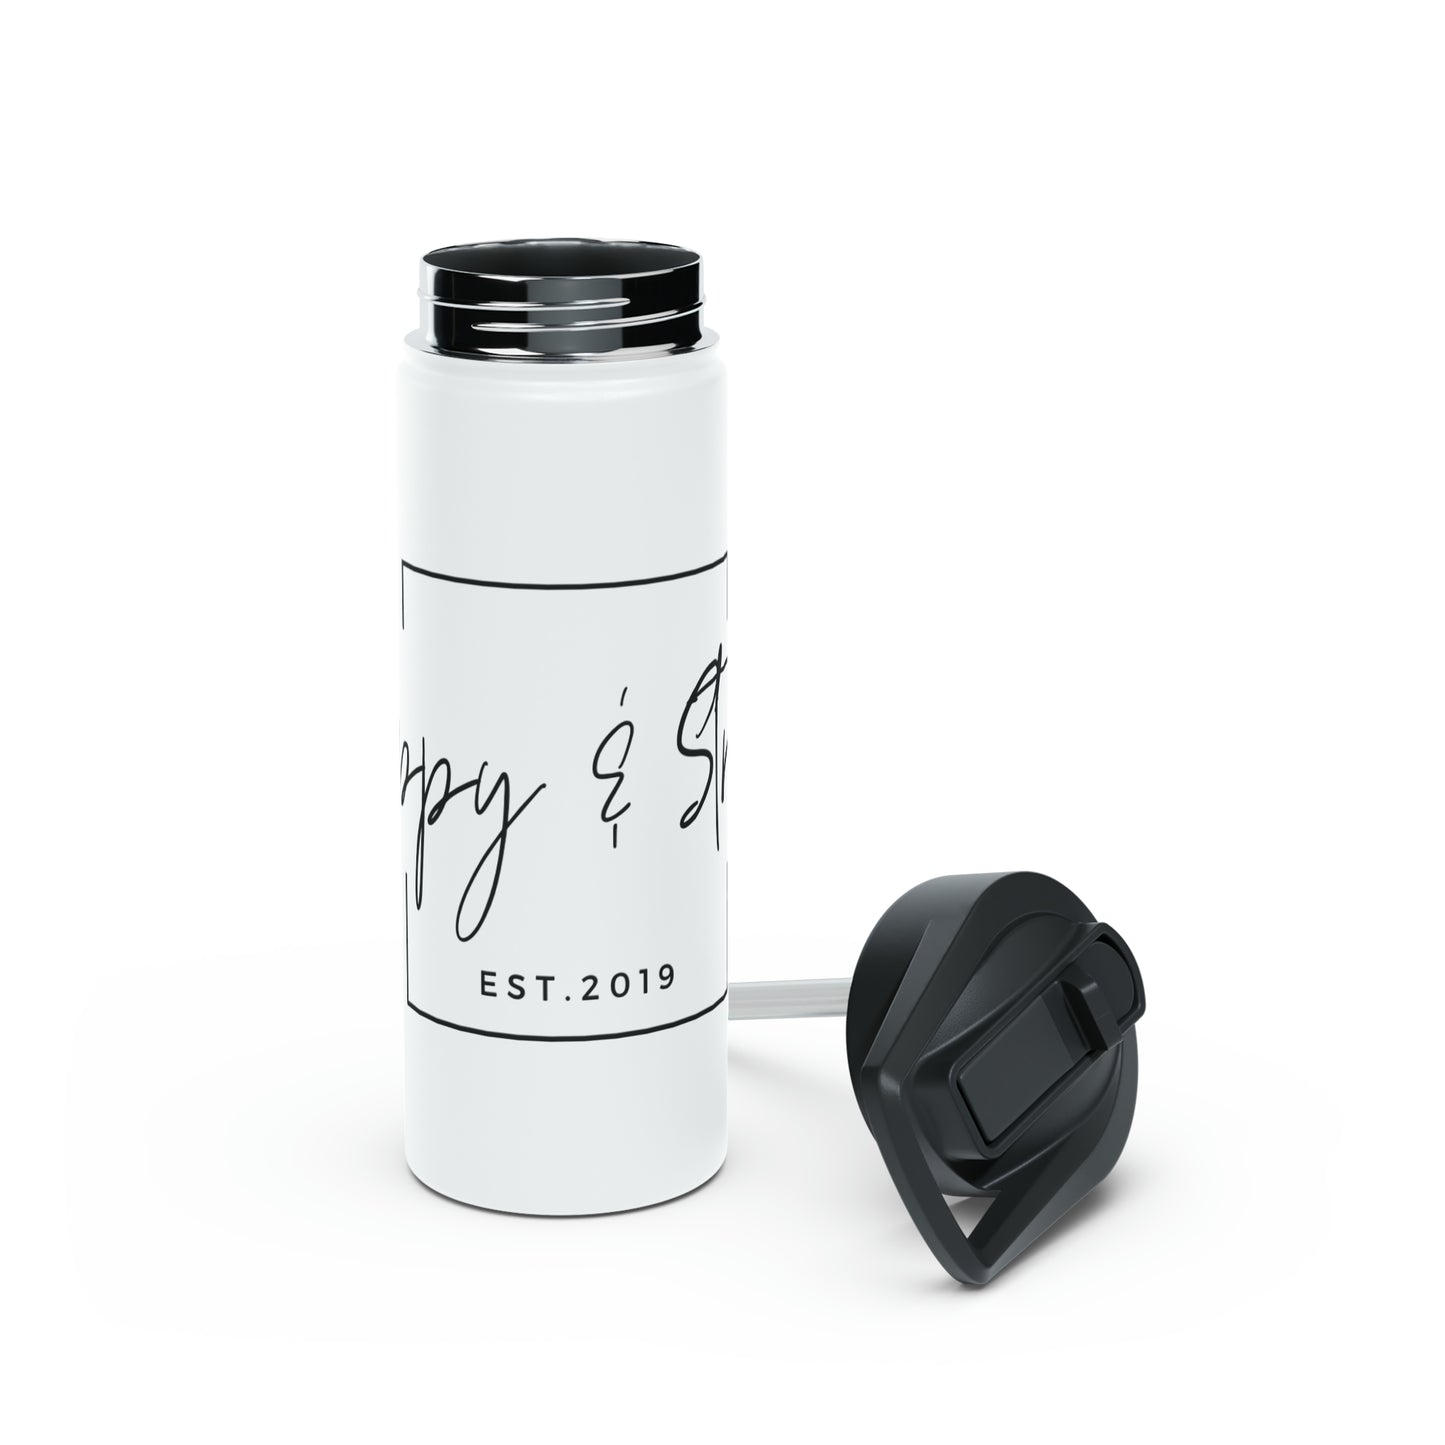 Happy & Strong Stainless Steel Water Bottle, Standard Lid